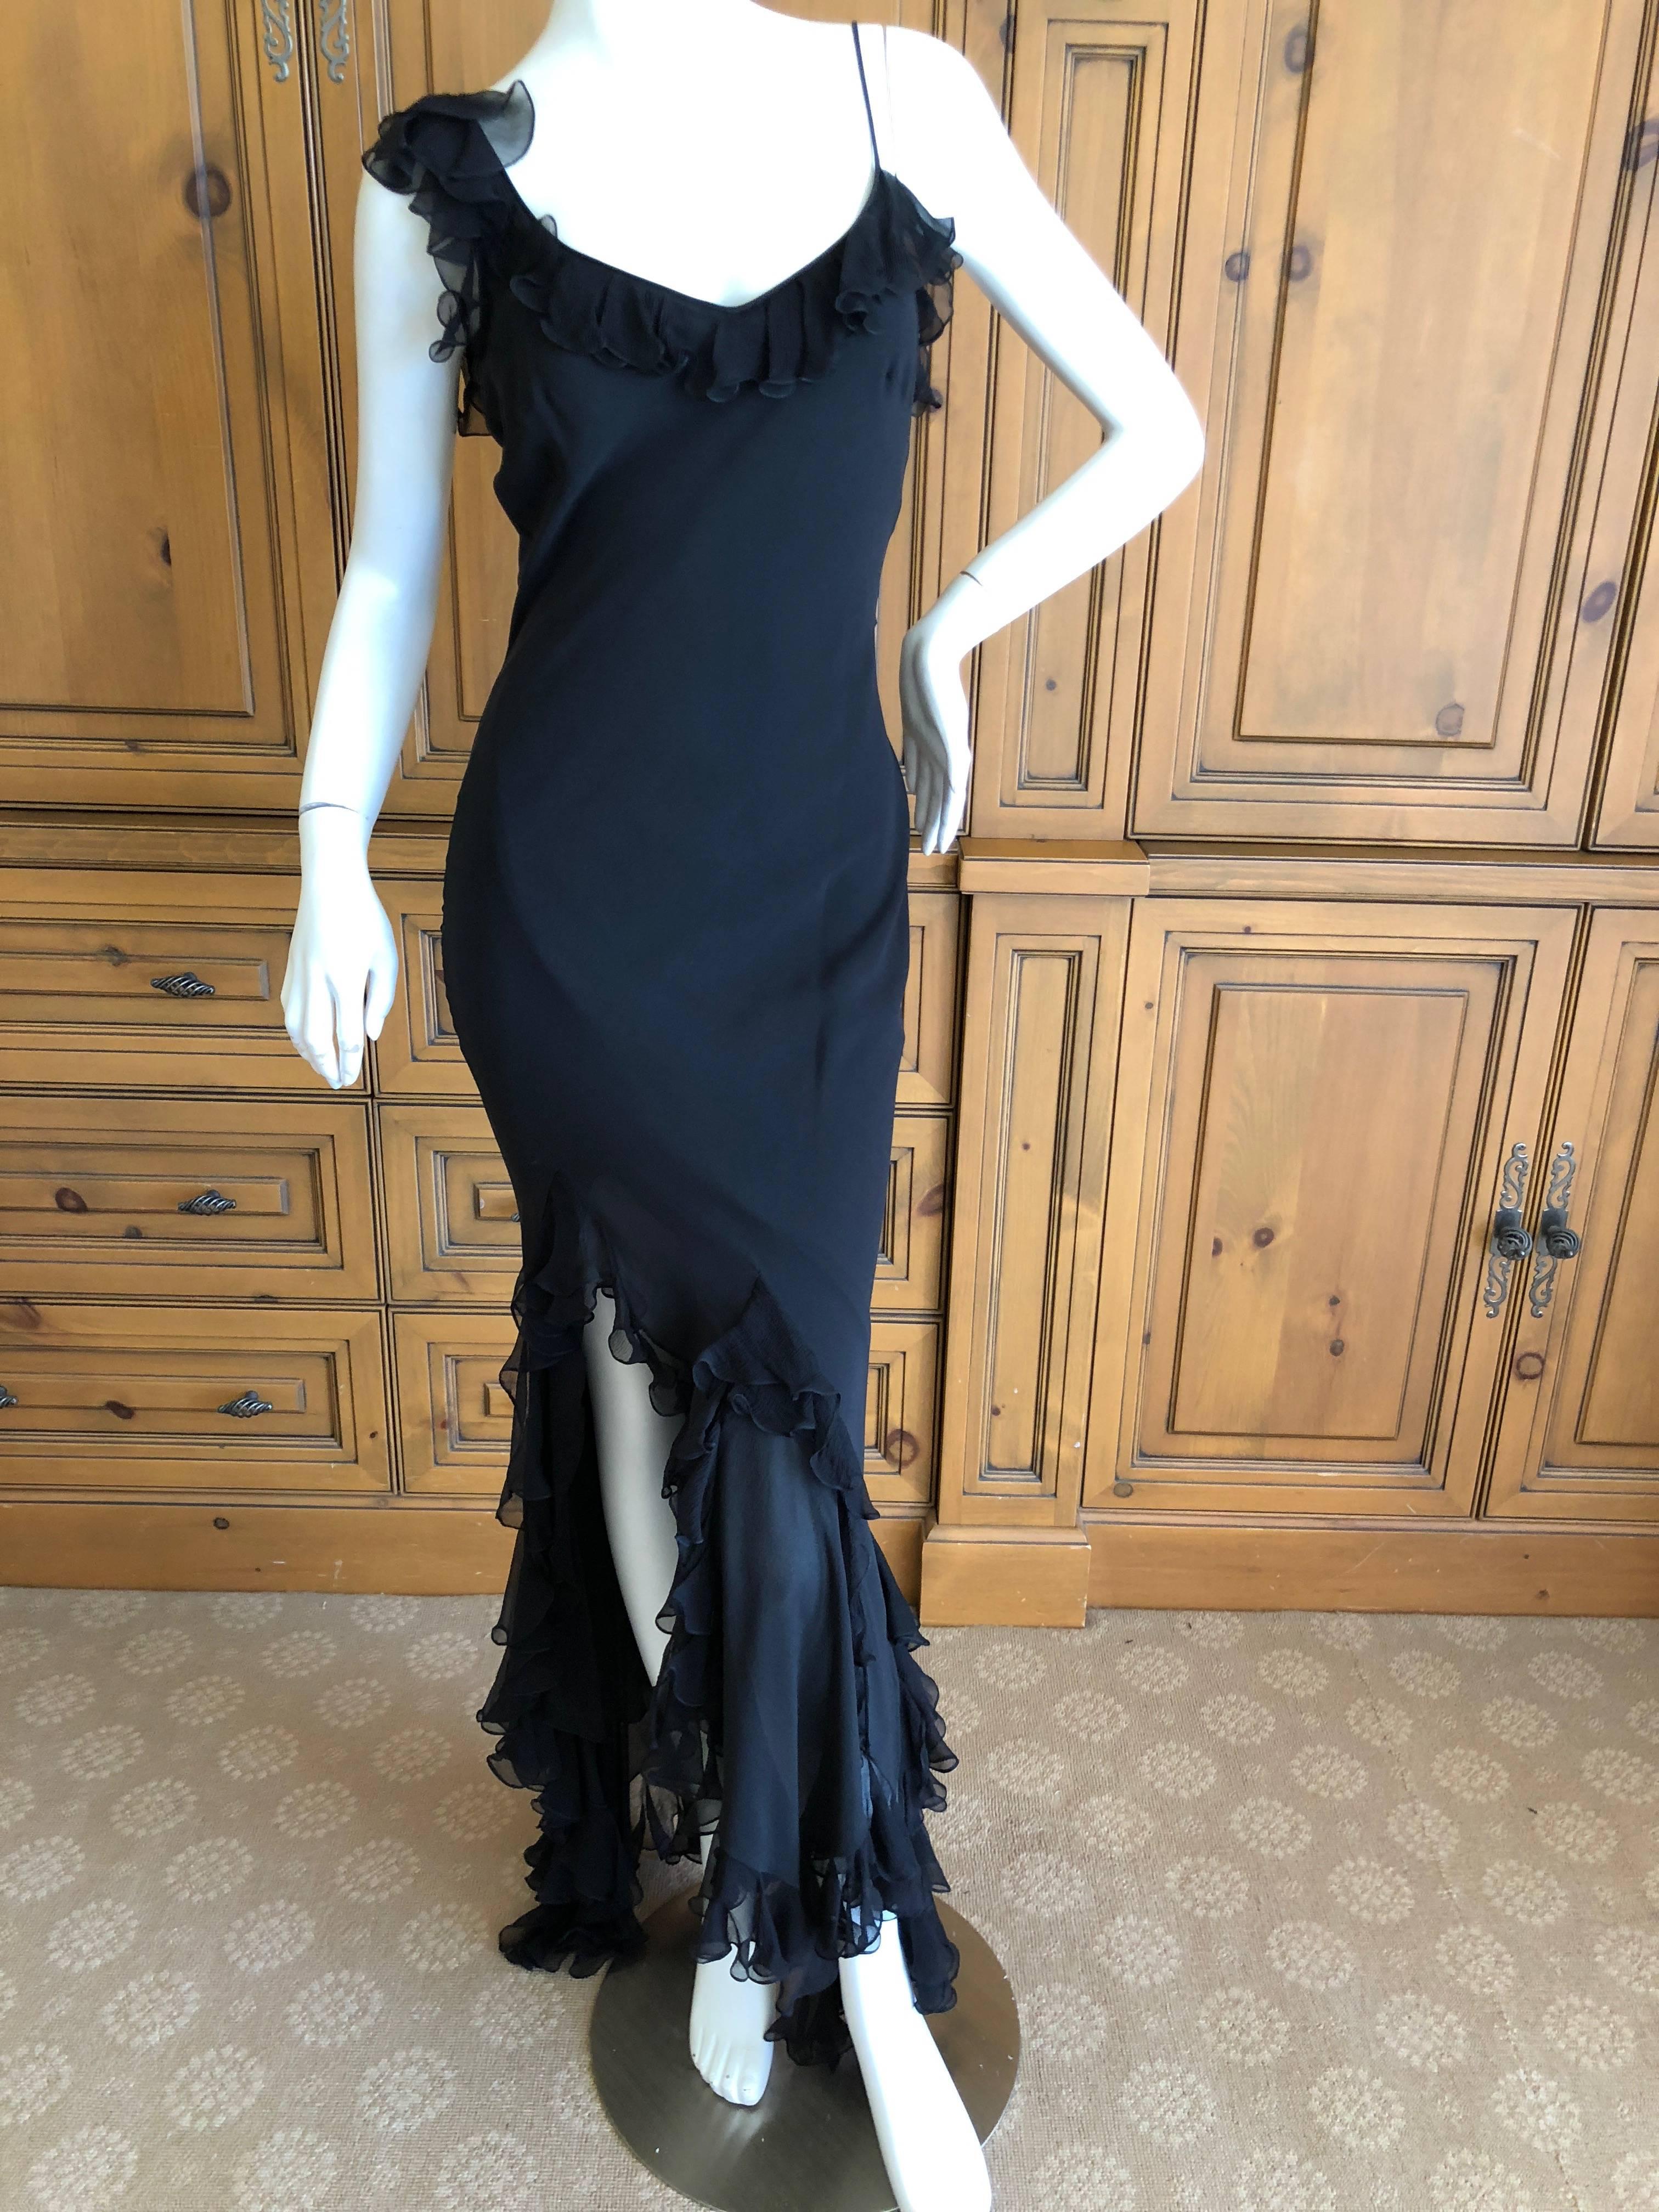 John Galliano Vintage Ruffled Flamenco Black Chiffon Dress with High Slit Sz 40 In Excellent Condition For Sale In Cloverdale, CA